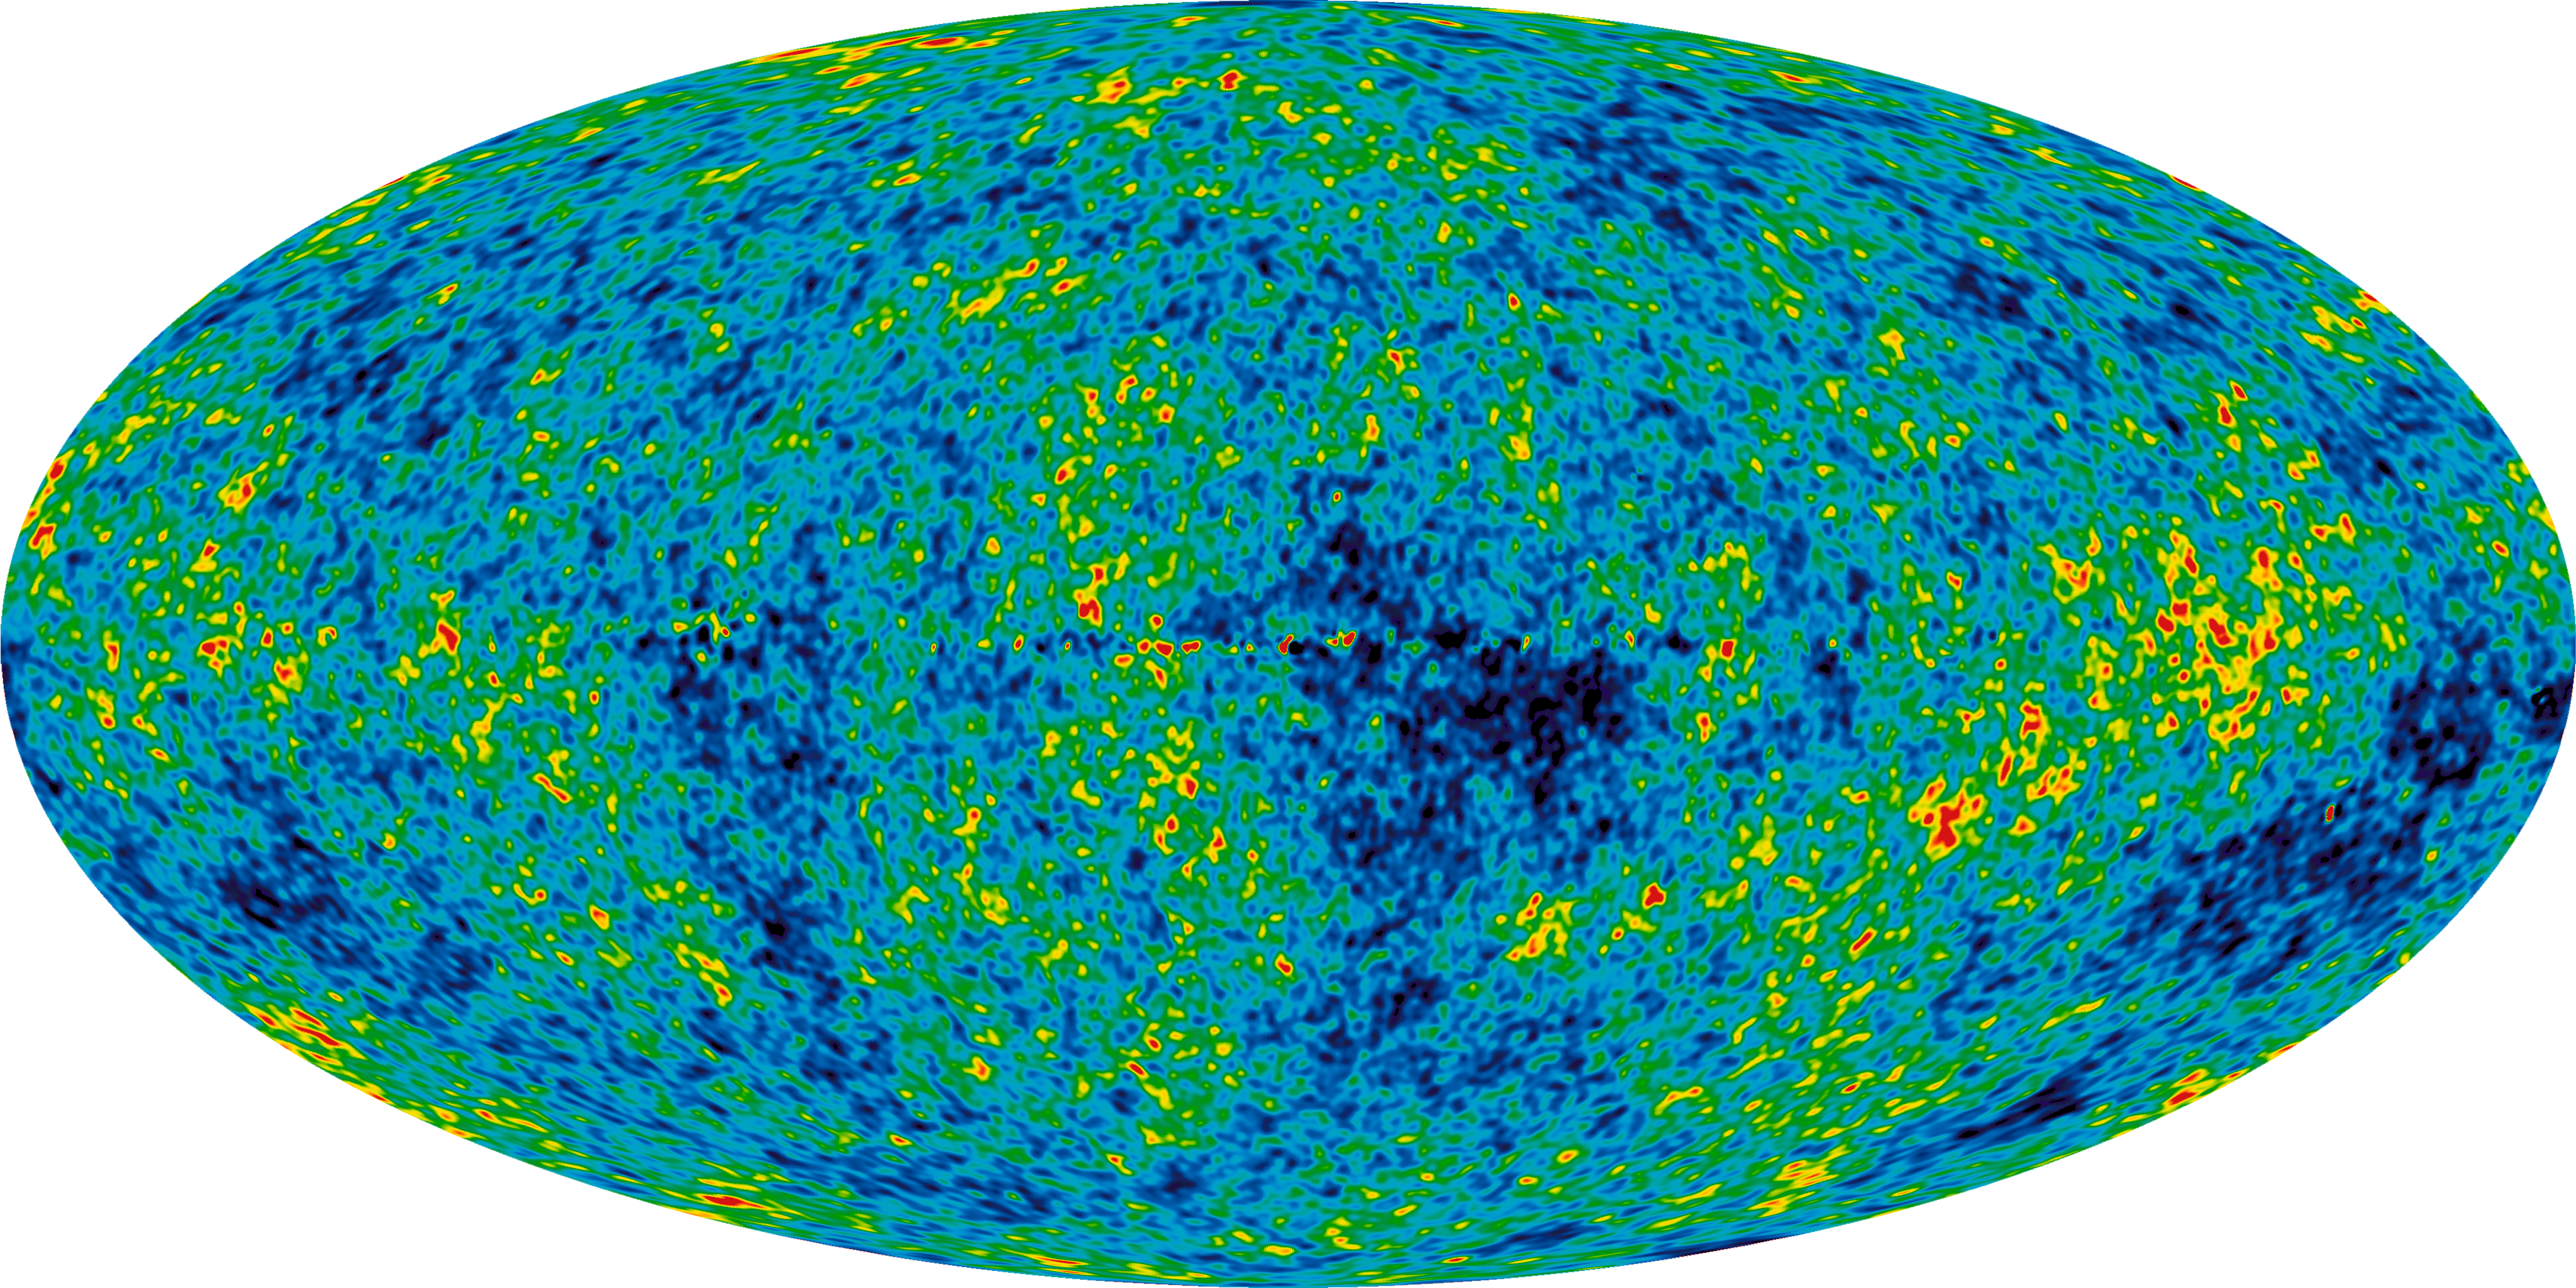  NASA/WMAP (Wilkinson Microwave Anisotropy Probe) Science Team's detailed, all-sky picture of the infant universe created from seven years of WMAP data. The image reveals 13.7 billion year old temperature fluctuations (shown as color differences) that correspond to the seeds that grew to become the galaxies. The signal from the our Galaxy was subtracted using the multi-frequency data. This image shows a temperature range of ± 200 microKelvin.